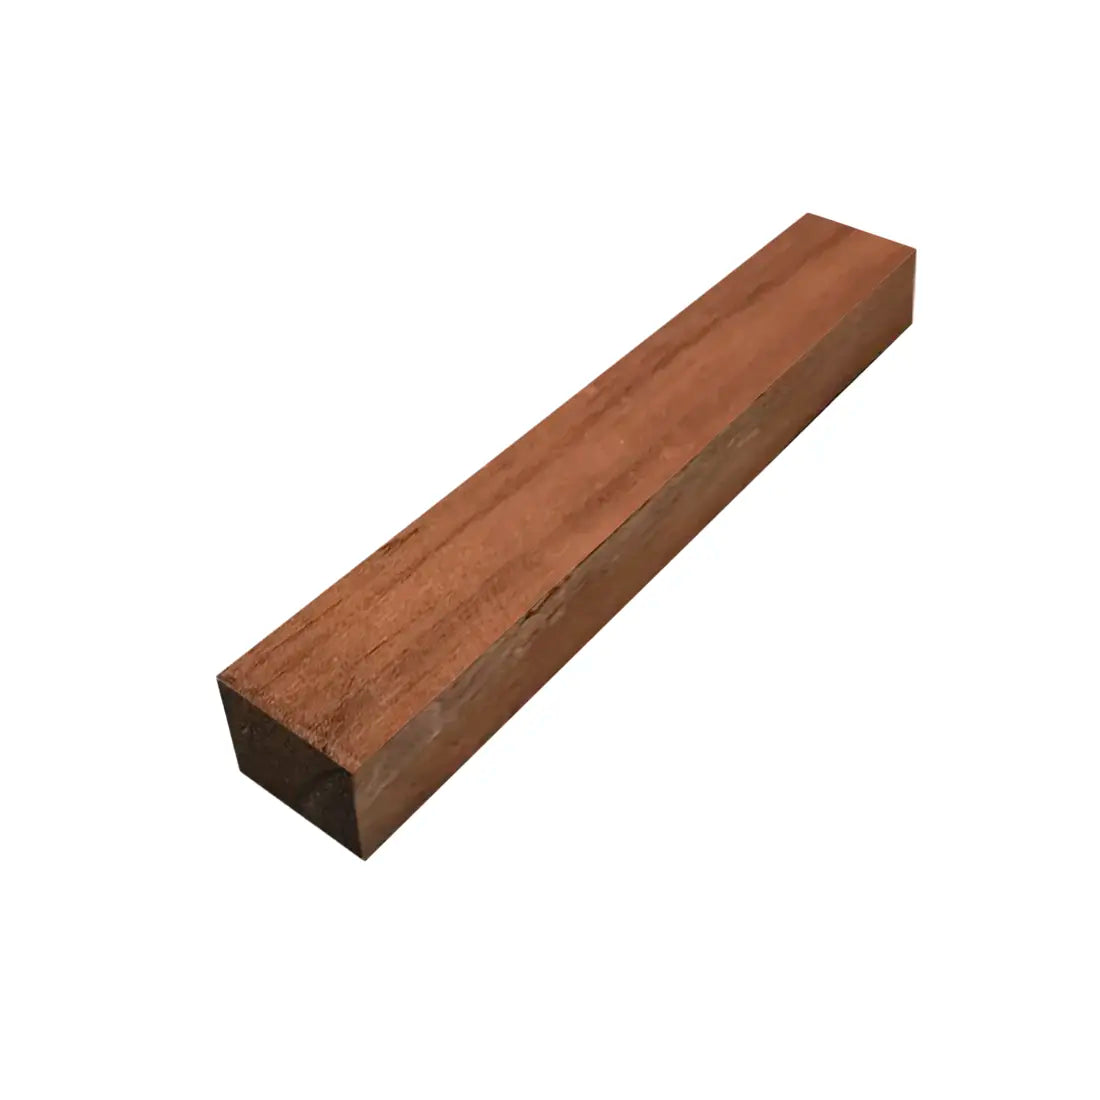 Indian Rosewood Inlay Wood Blanks 1/4” x 1-1/2“ x 9” - Exotic Wood Zone - Buy online Across USA 